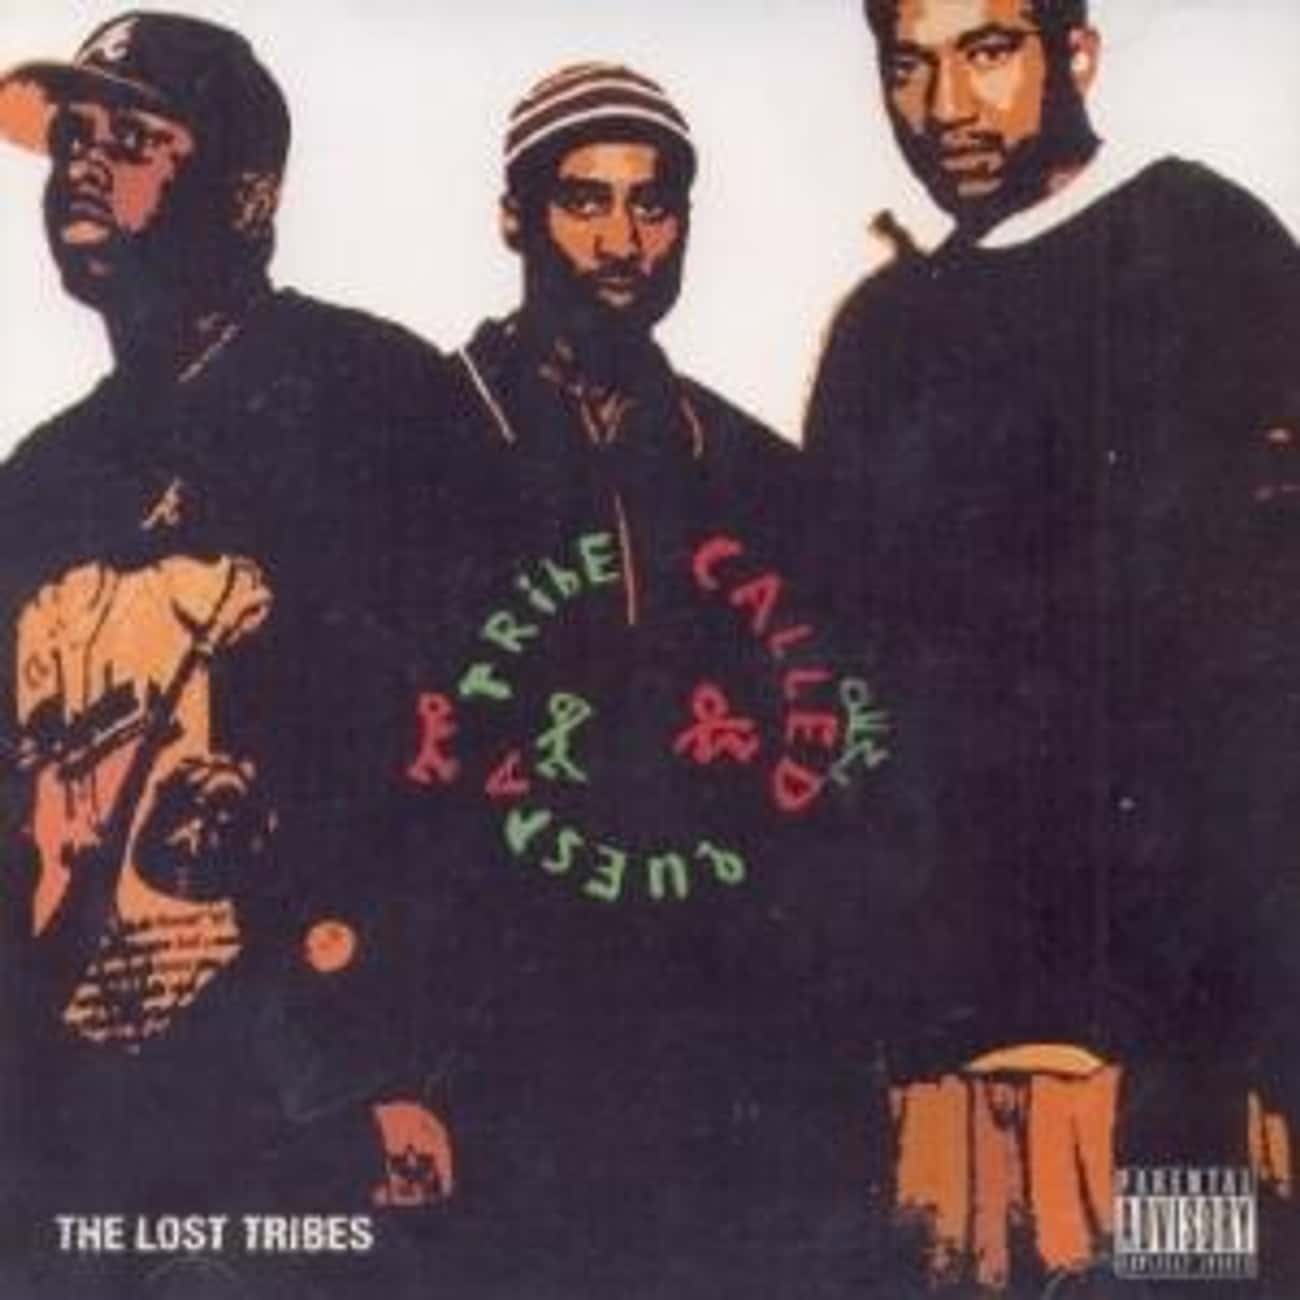 The lost tribe. A Tribe Called Quest scenario. A Tribe Called Quest the Remedy. Племя под названием квест.